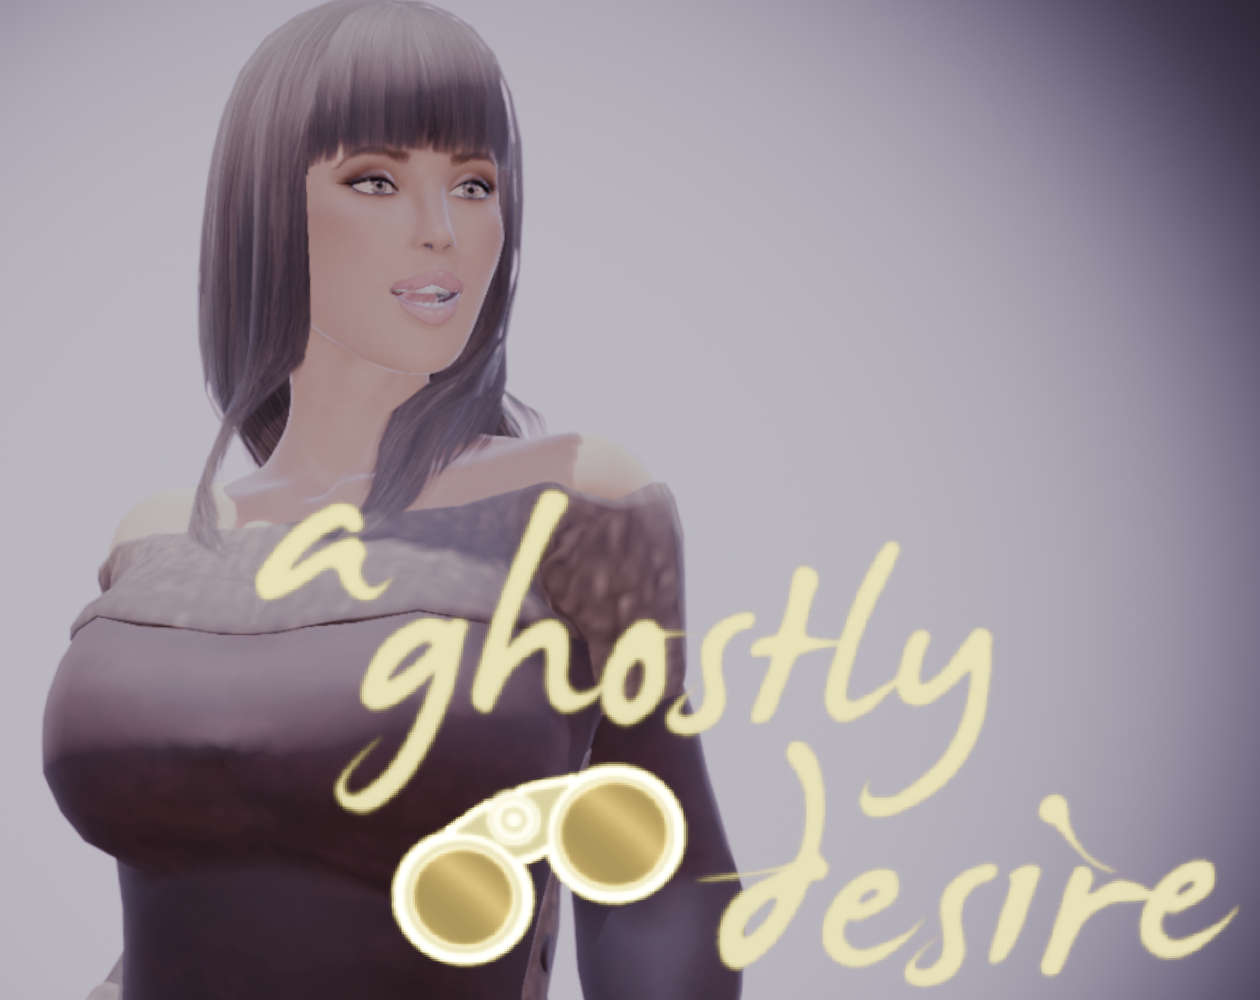 Release] A ghostly desire - Alpha 0.2 - 14Mar21 - [18+] A ghostly desire by  Sitho Entertainment